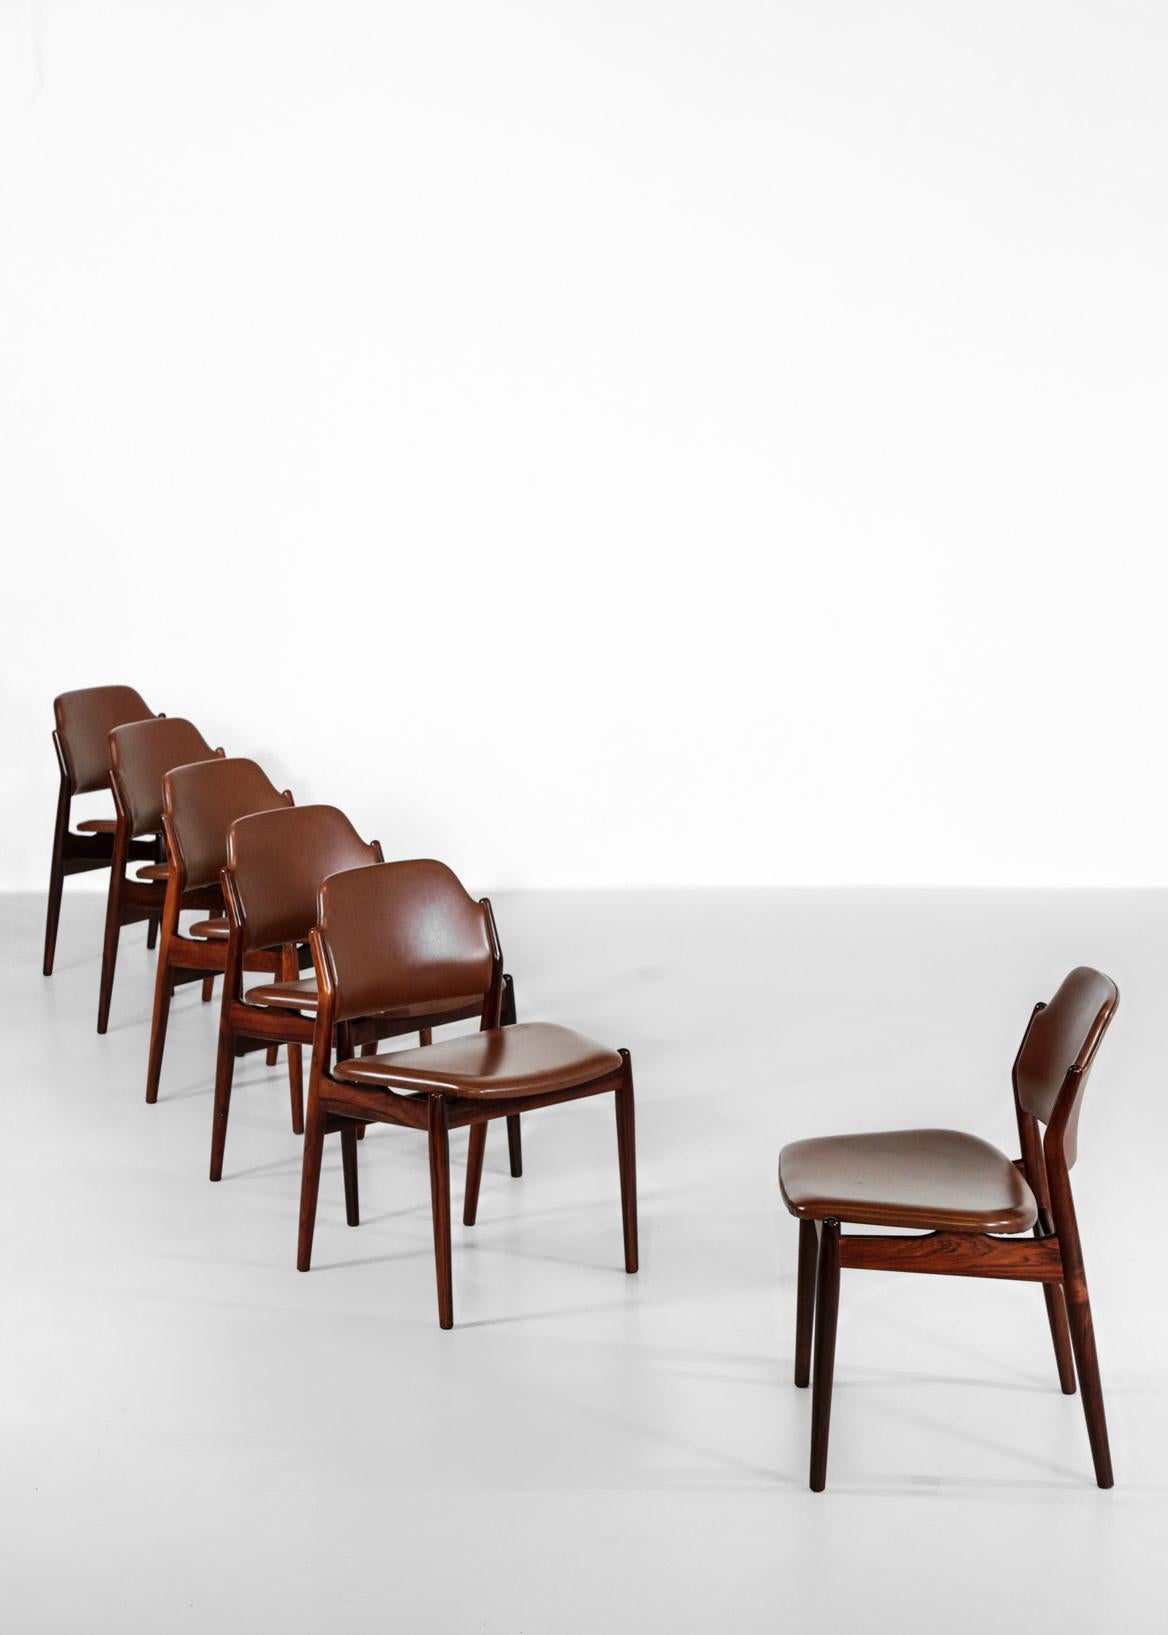 20th Century Arne Vodder Chairs, Set of 6 in solid wood Denmark For Sale